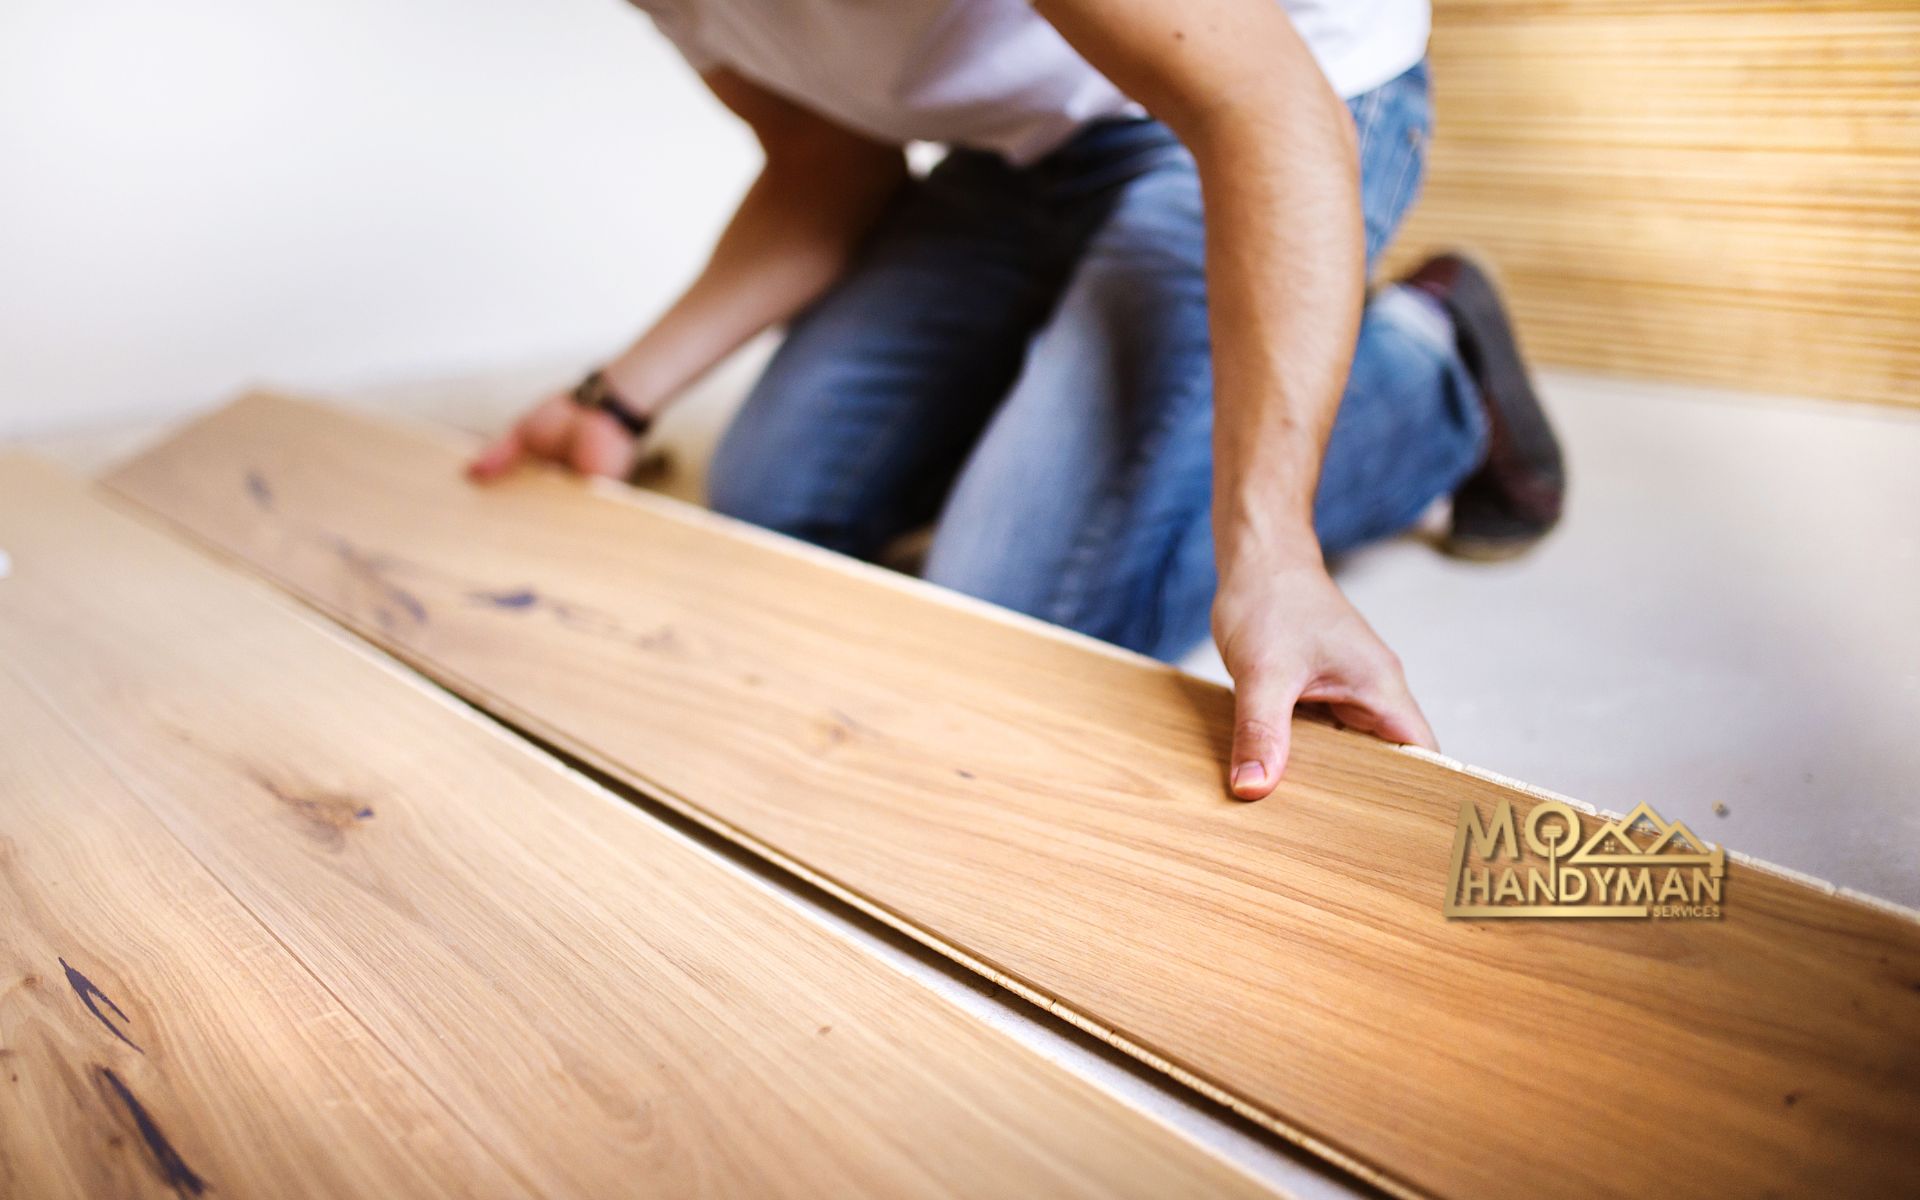 Selection of durable flooring materials for cost-effective upgrades, ensuring long-lasting quality and value for your home improvement projects.